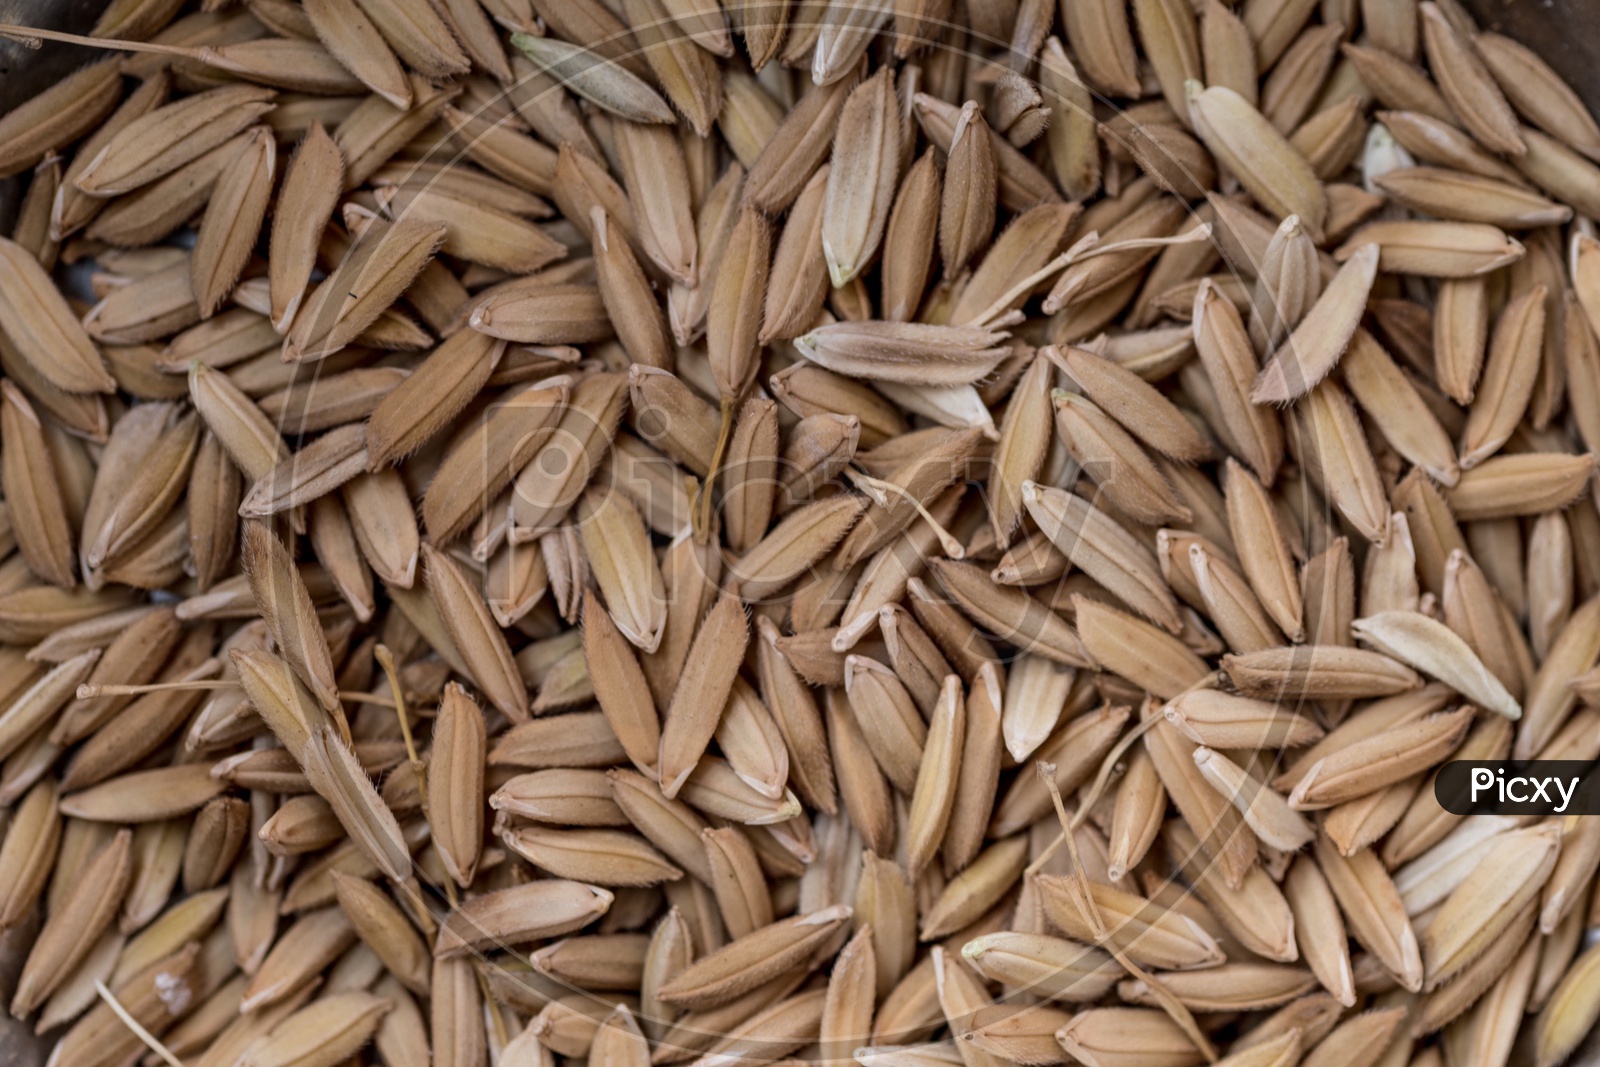 Paddy grains or rice grains